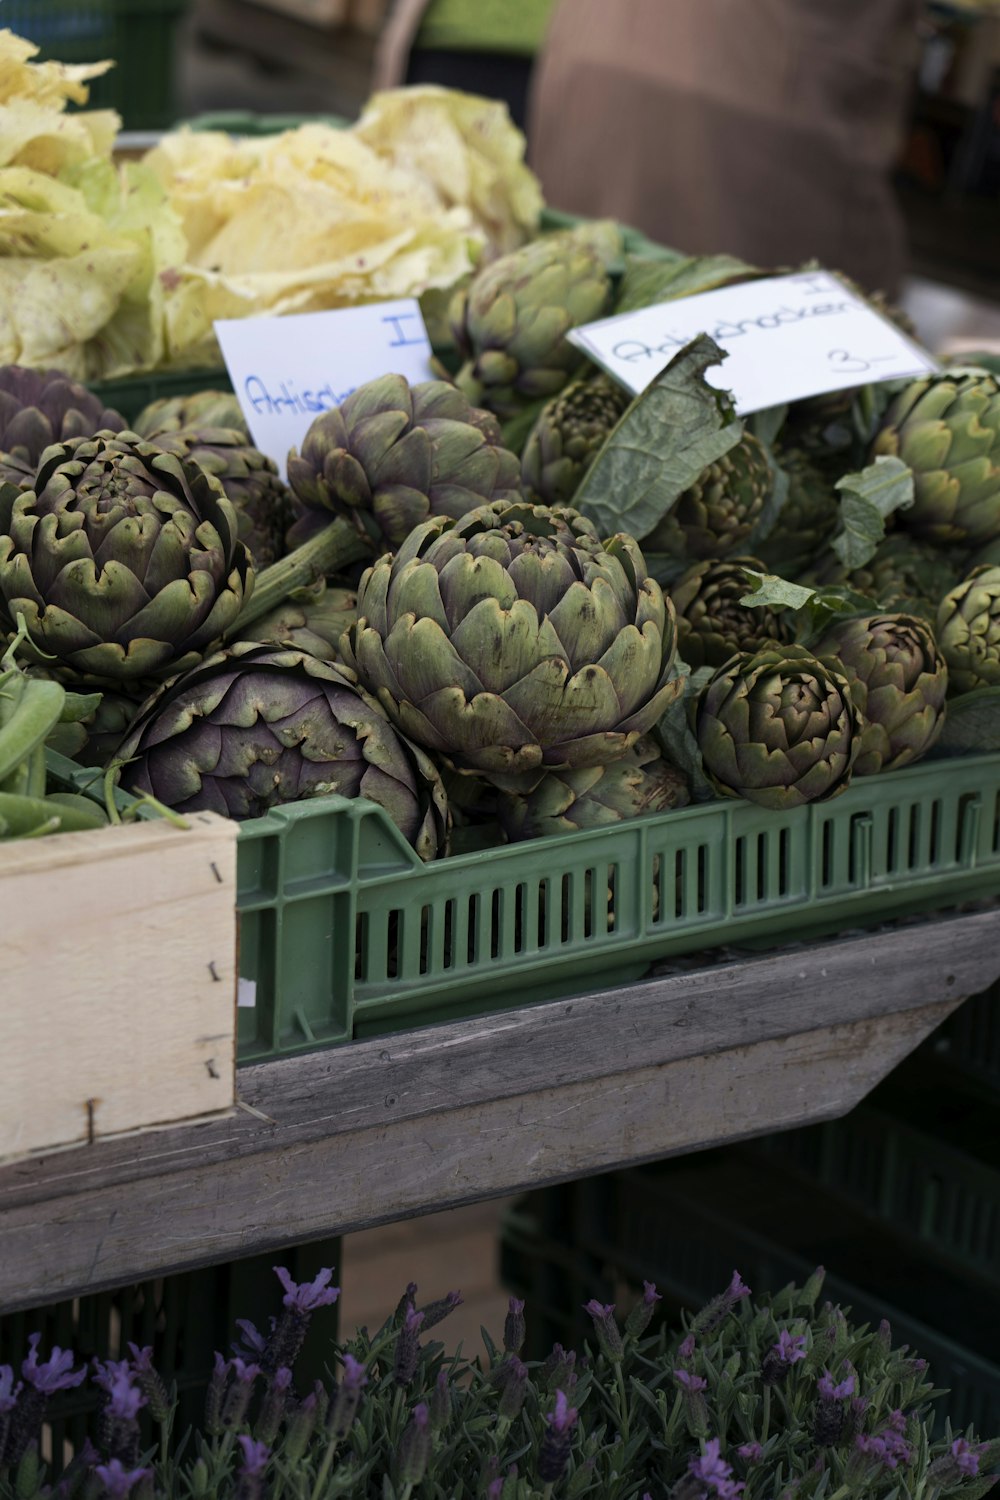 a bunch of artichokes on display in a market